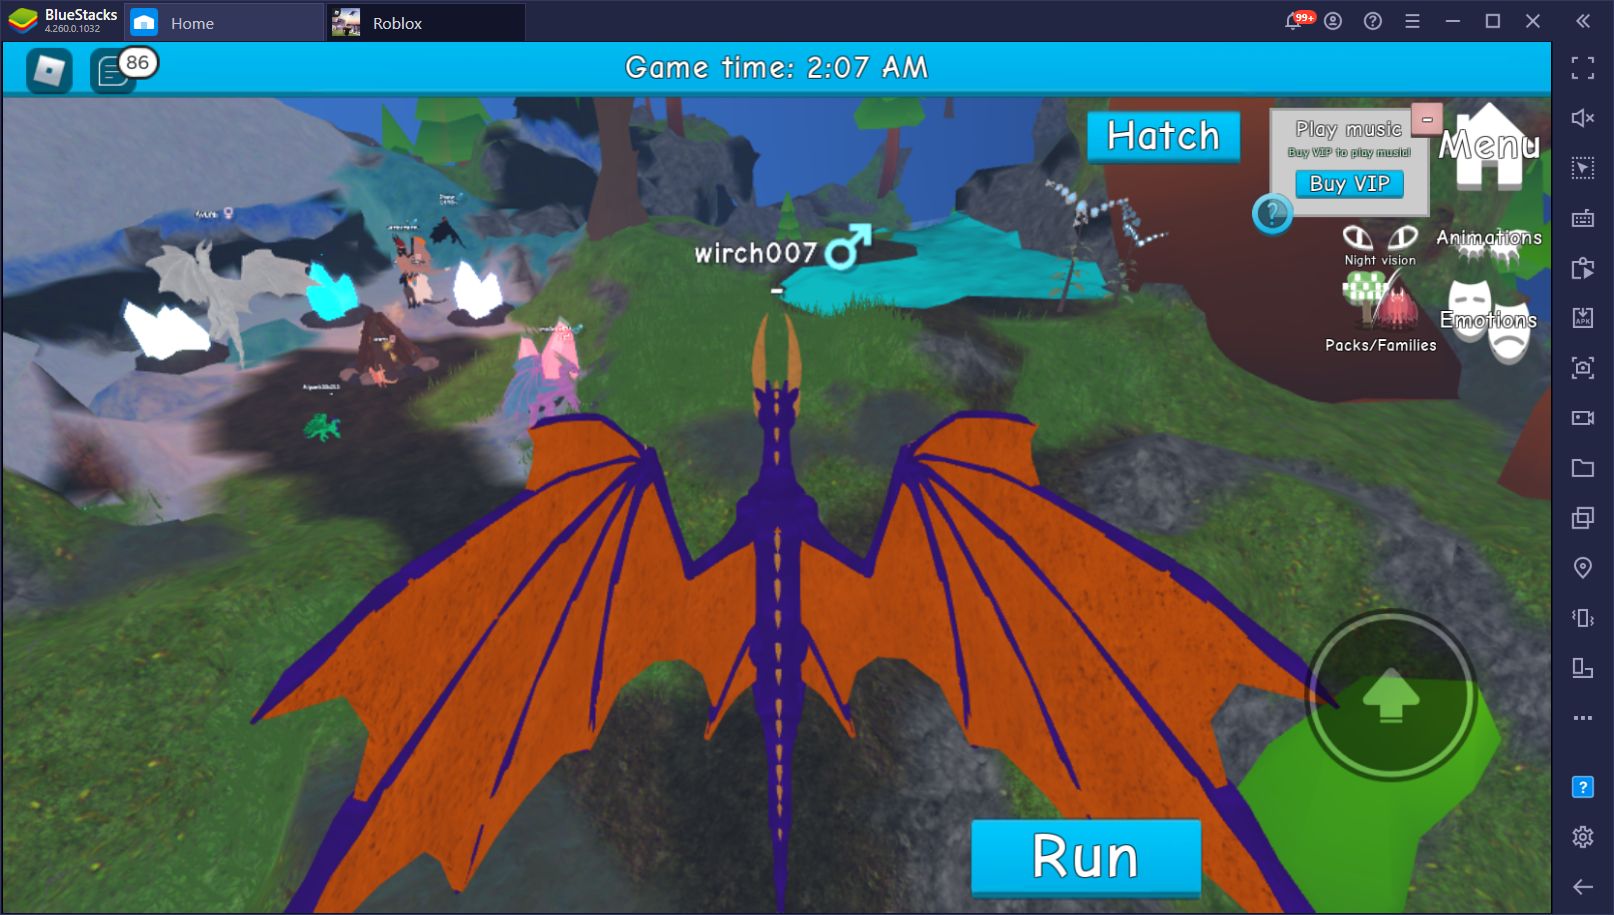 The Best Roblox Games To Play In 2021 Bluestacks - how to play dragon life in roblox